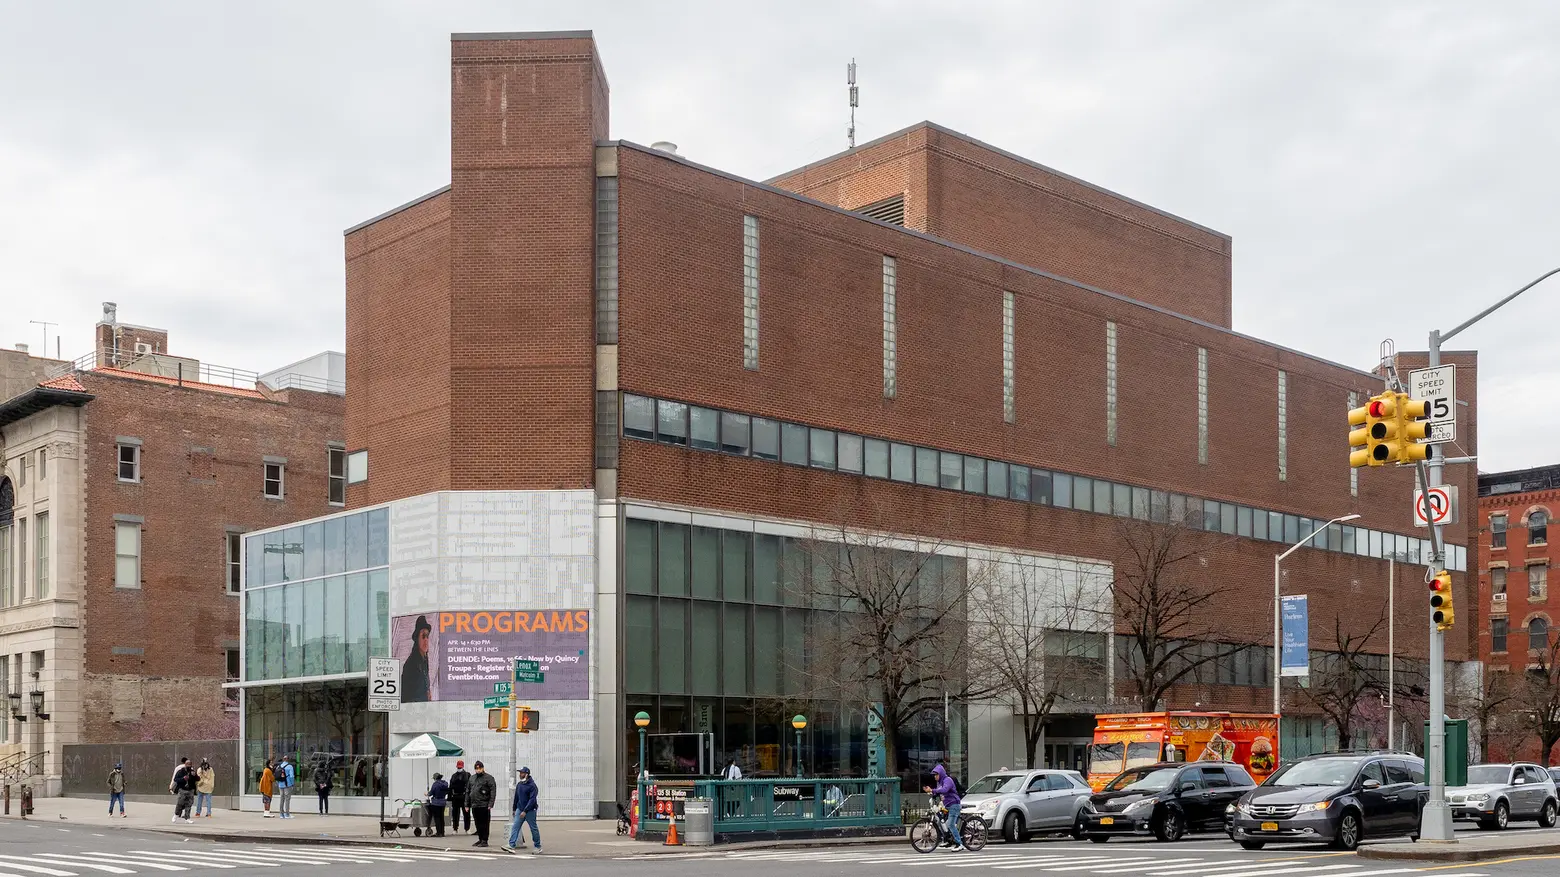 New York commits $8M to renovate Harlem’s Schomburg Center for Research in Black Culture